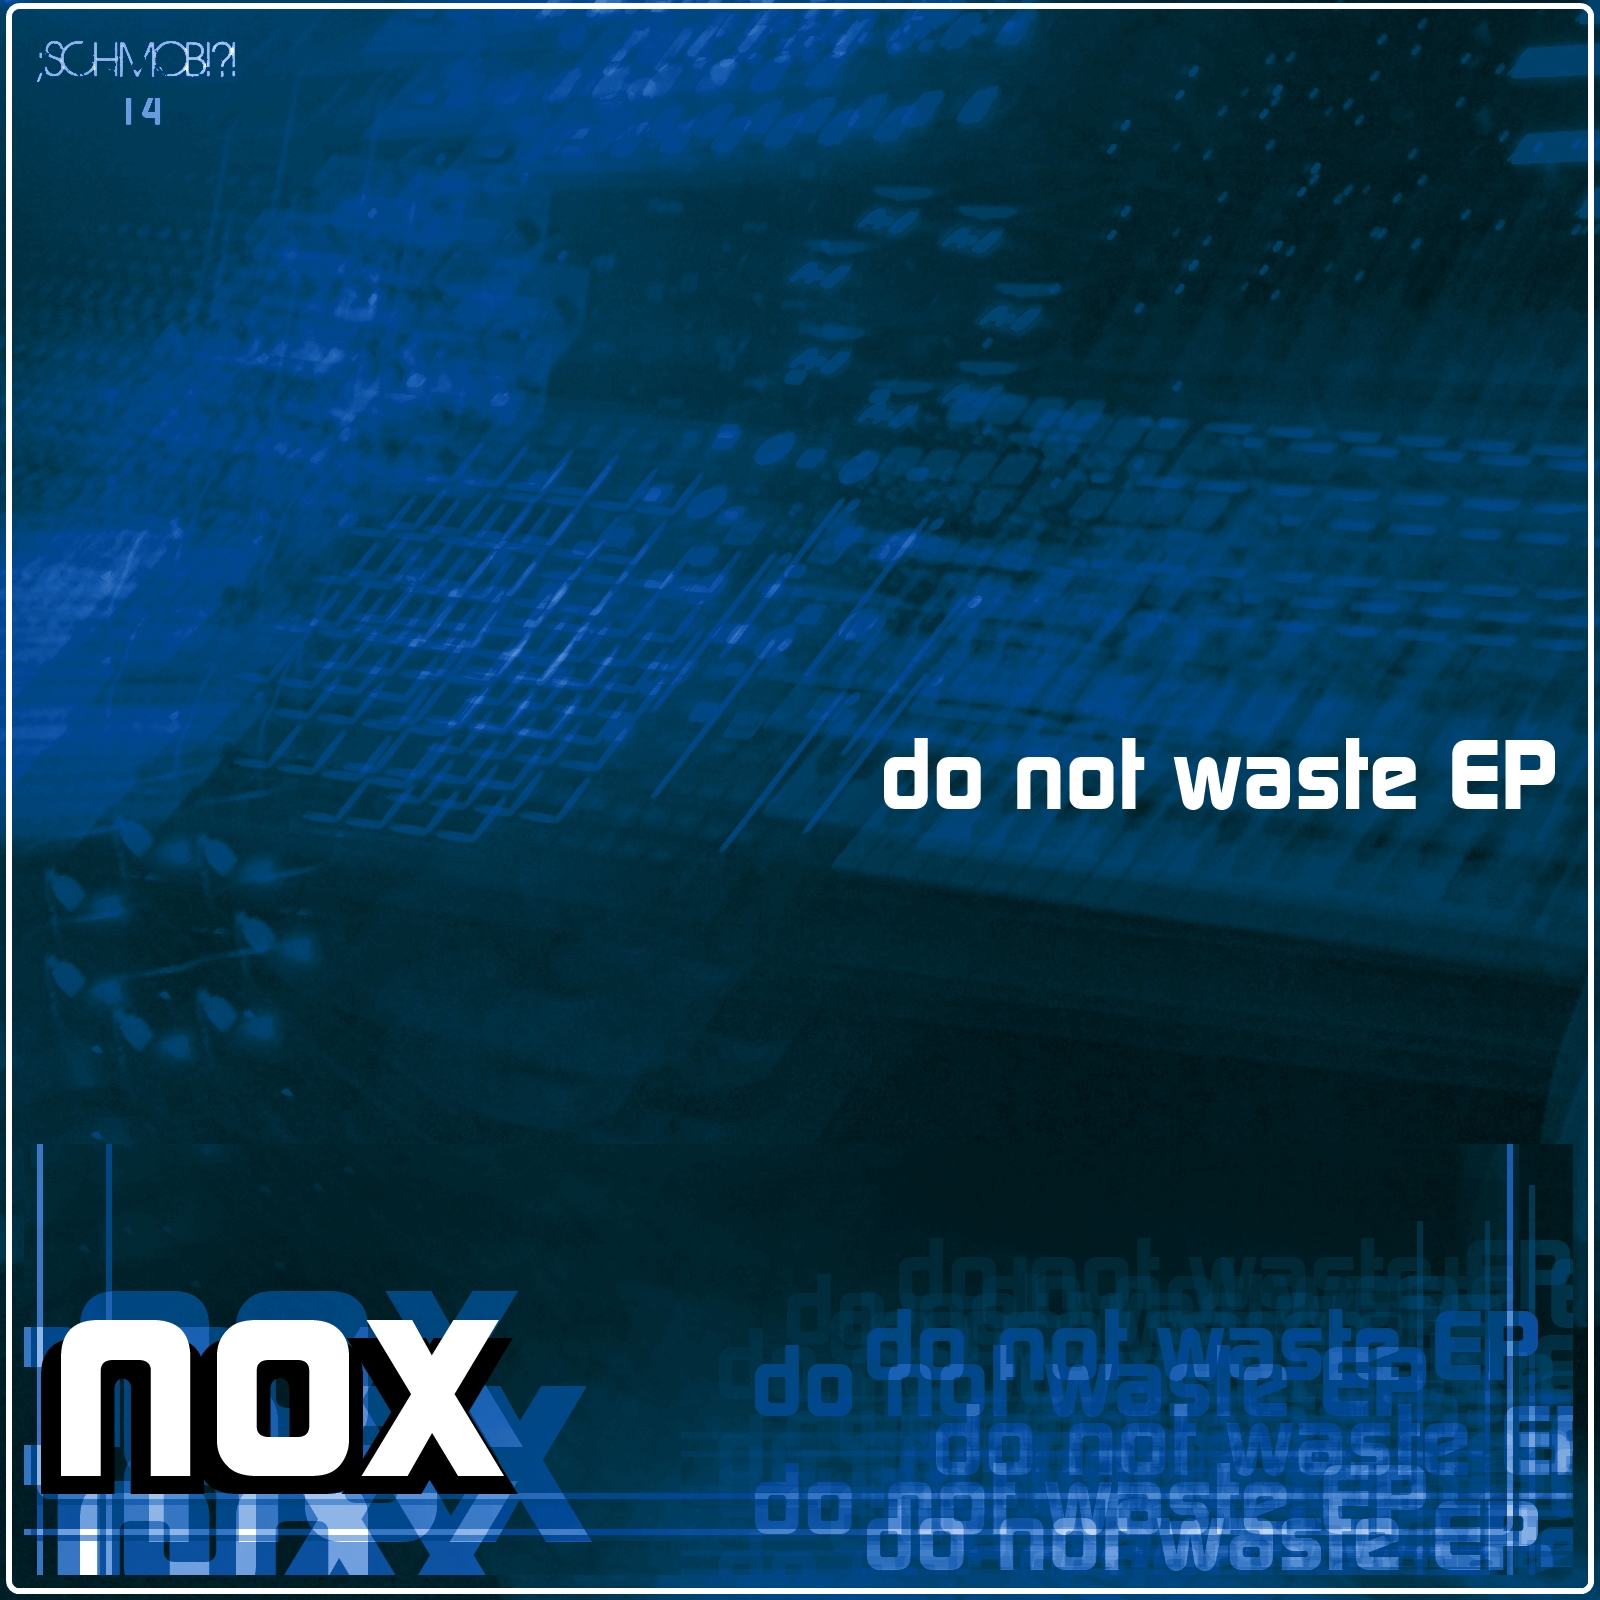 Nox – Do not waste EP